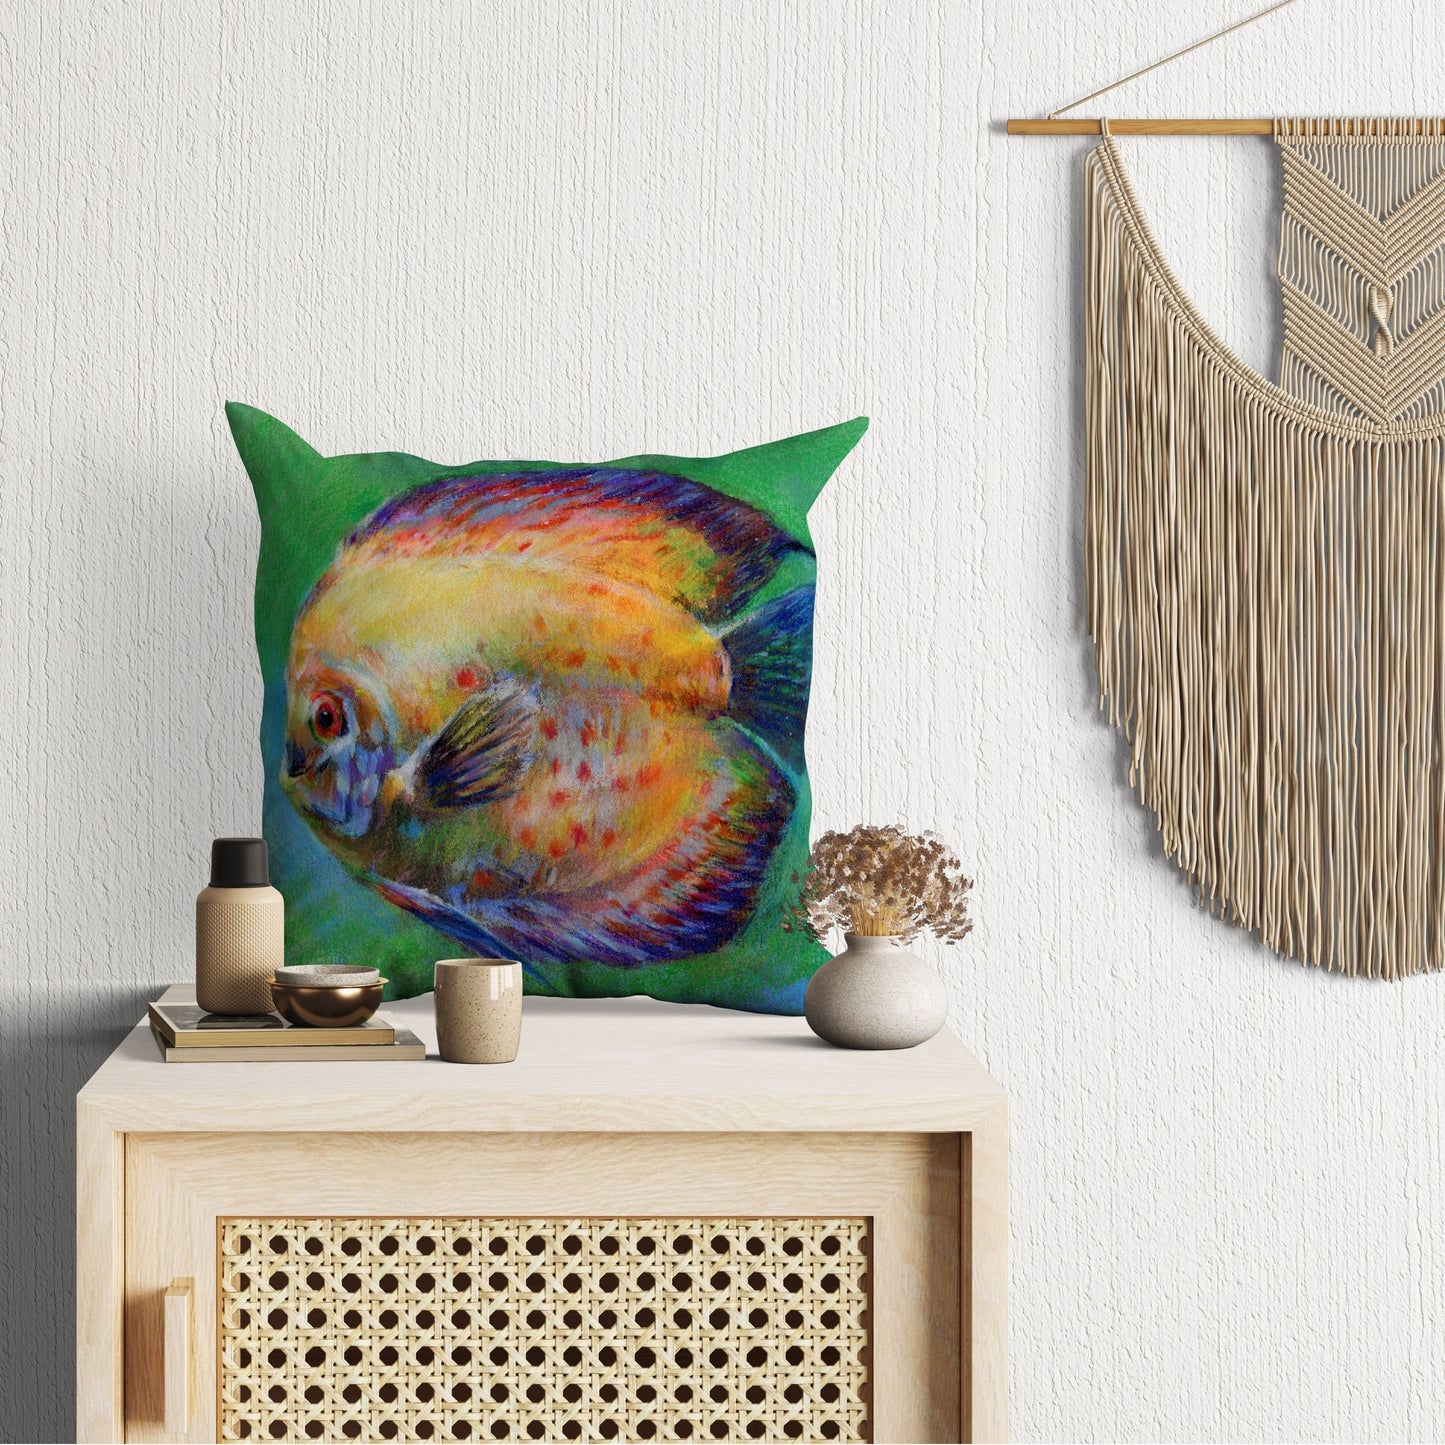 Tropical Fish, Watercolor Pillow Cases, Throw Pillow Cover, Tropical Pillow Cases, Soft Pillow Case, Colorful Pillow Case, Cute Pillow Cases